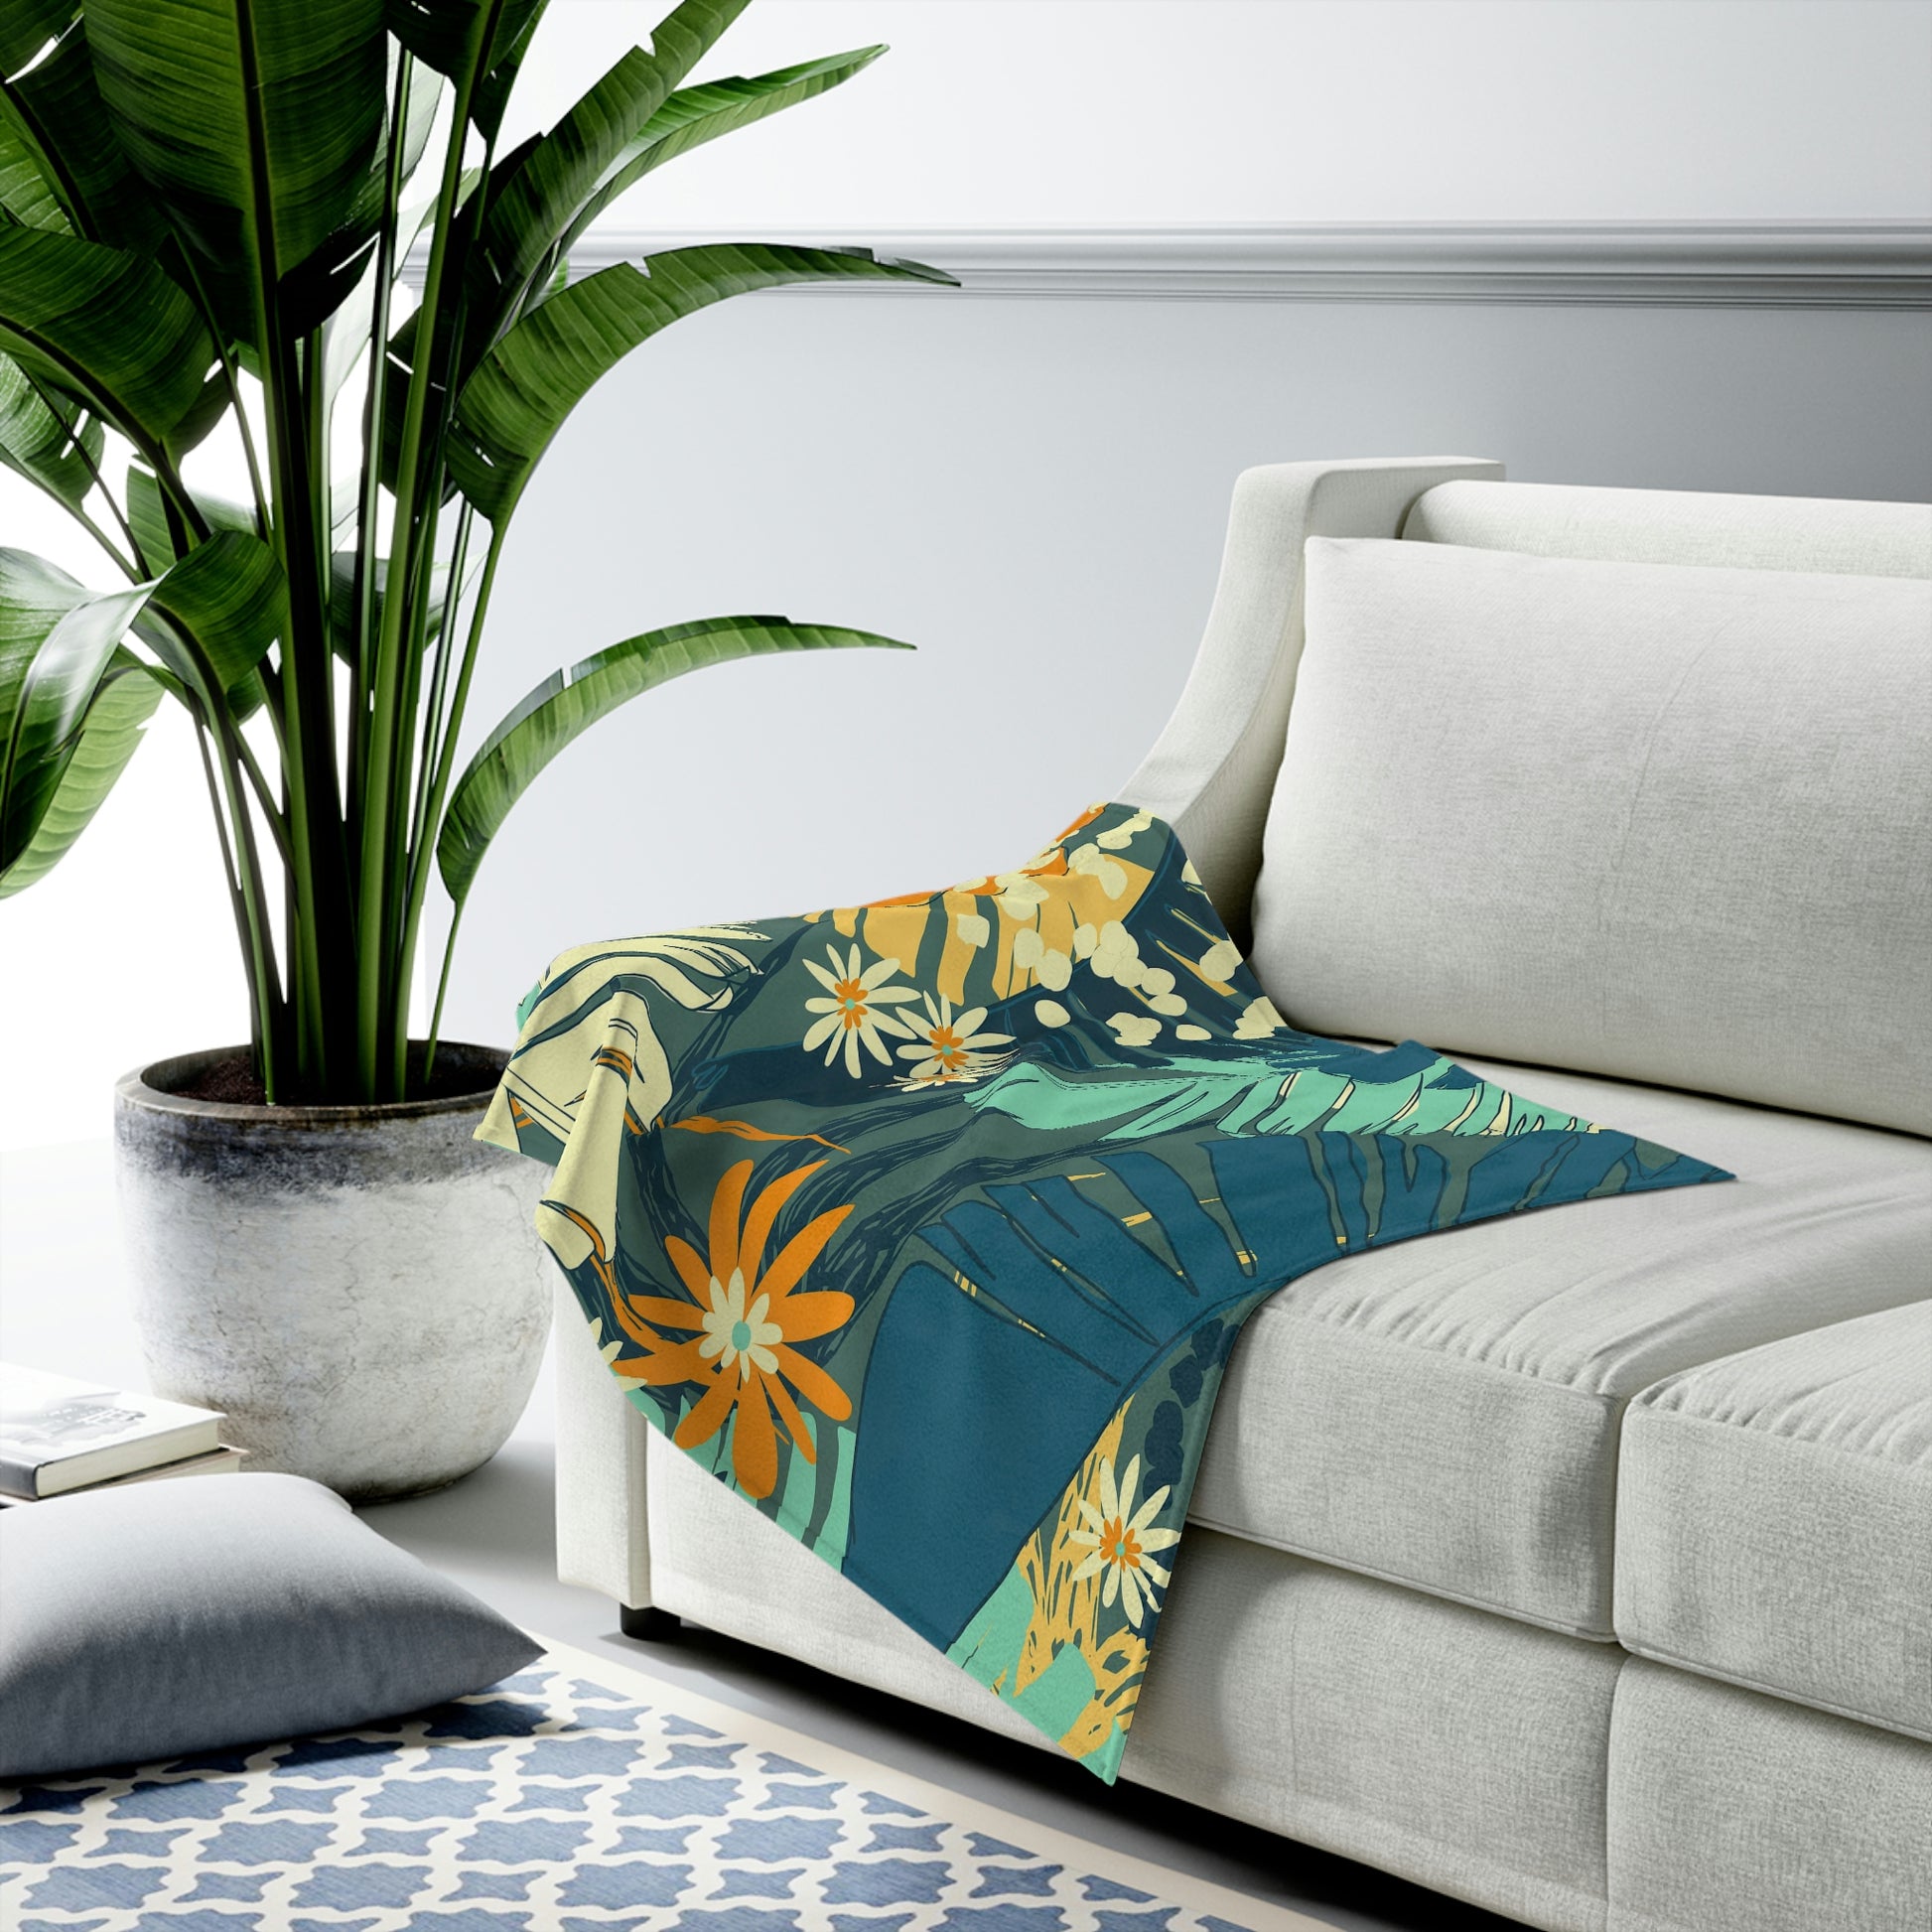 Jungle Blues Collection Velveteen Plush Blanket, Sensual Tropical Print for your Vacation Home